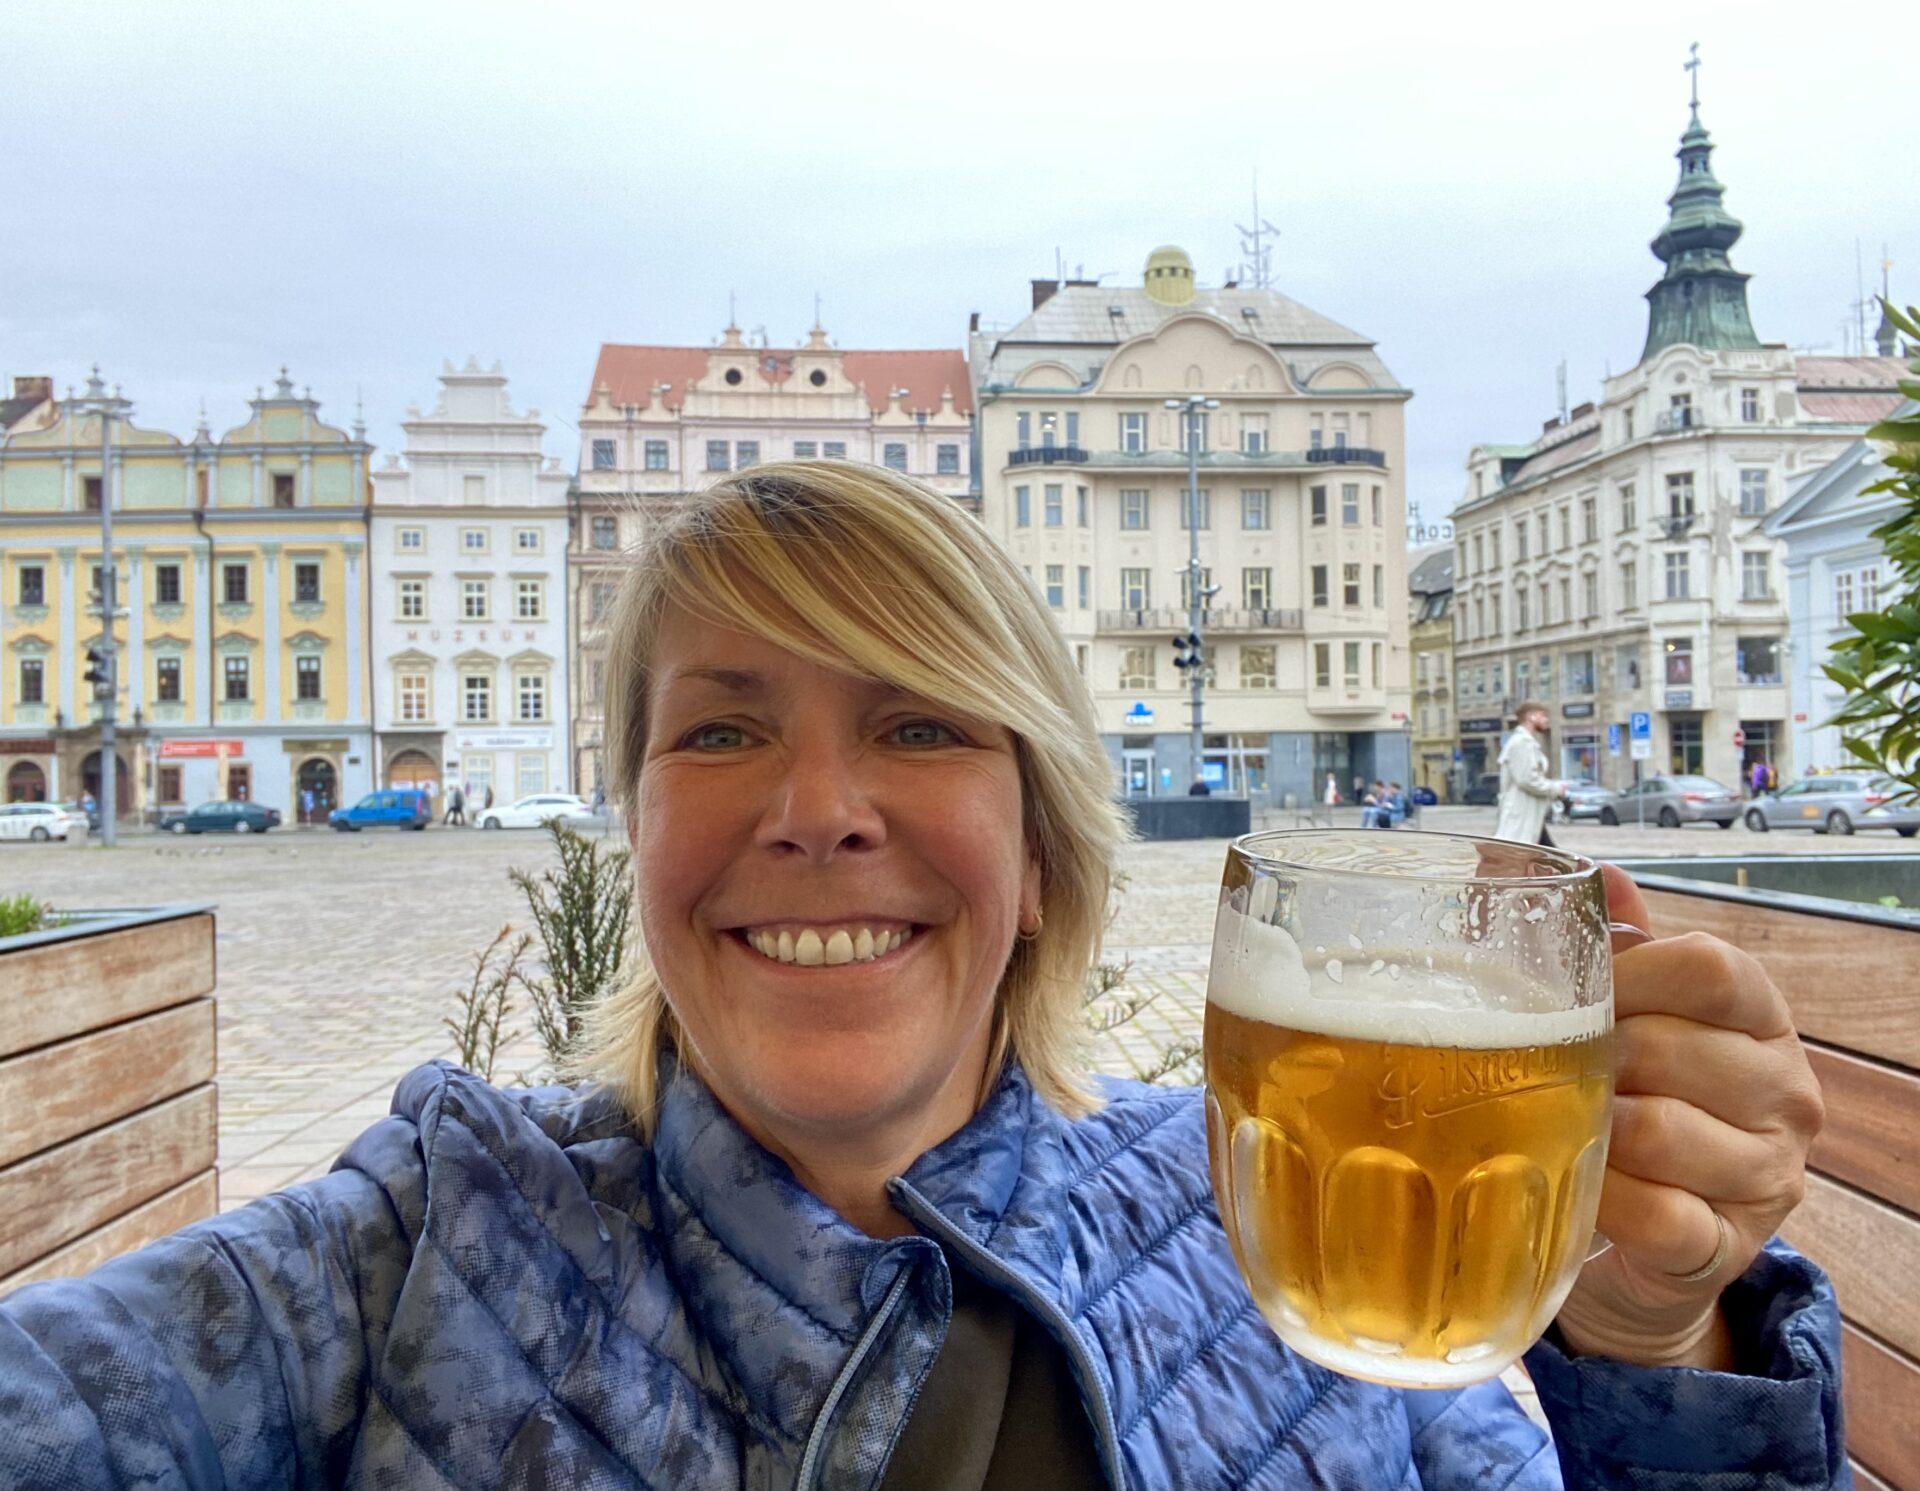 You are currently viewing Fairytales and pilsner in the Czech Republic